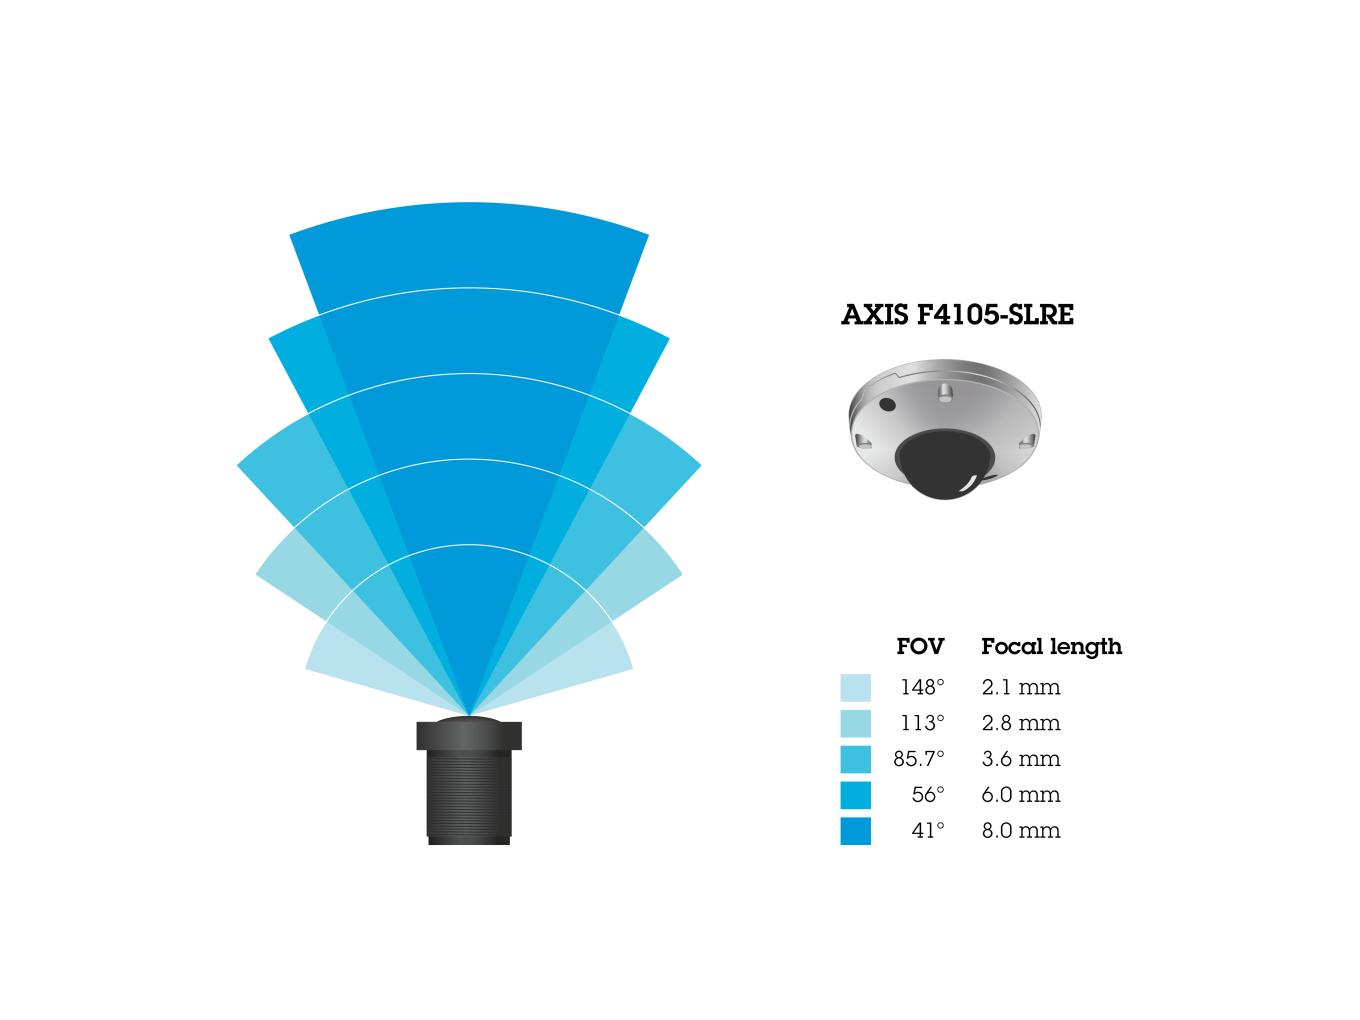 Lens options for AXIS F4105-SLRE